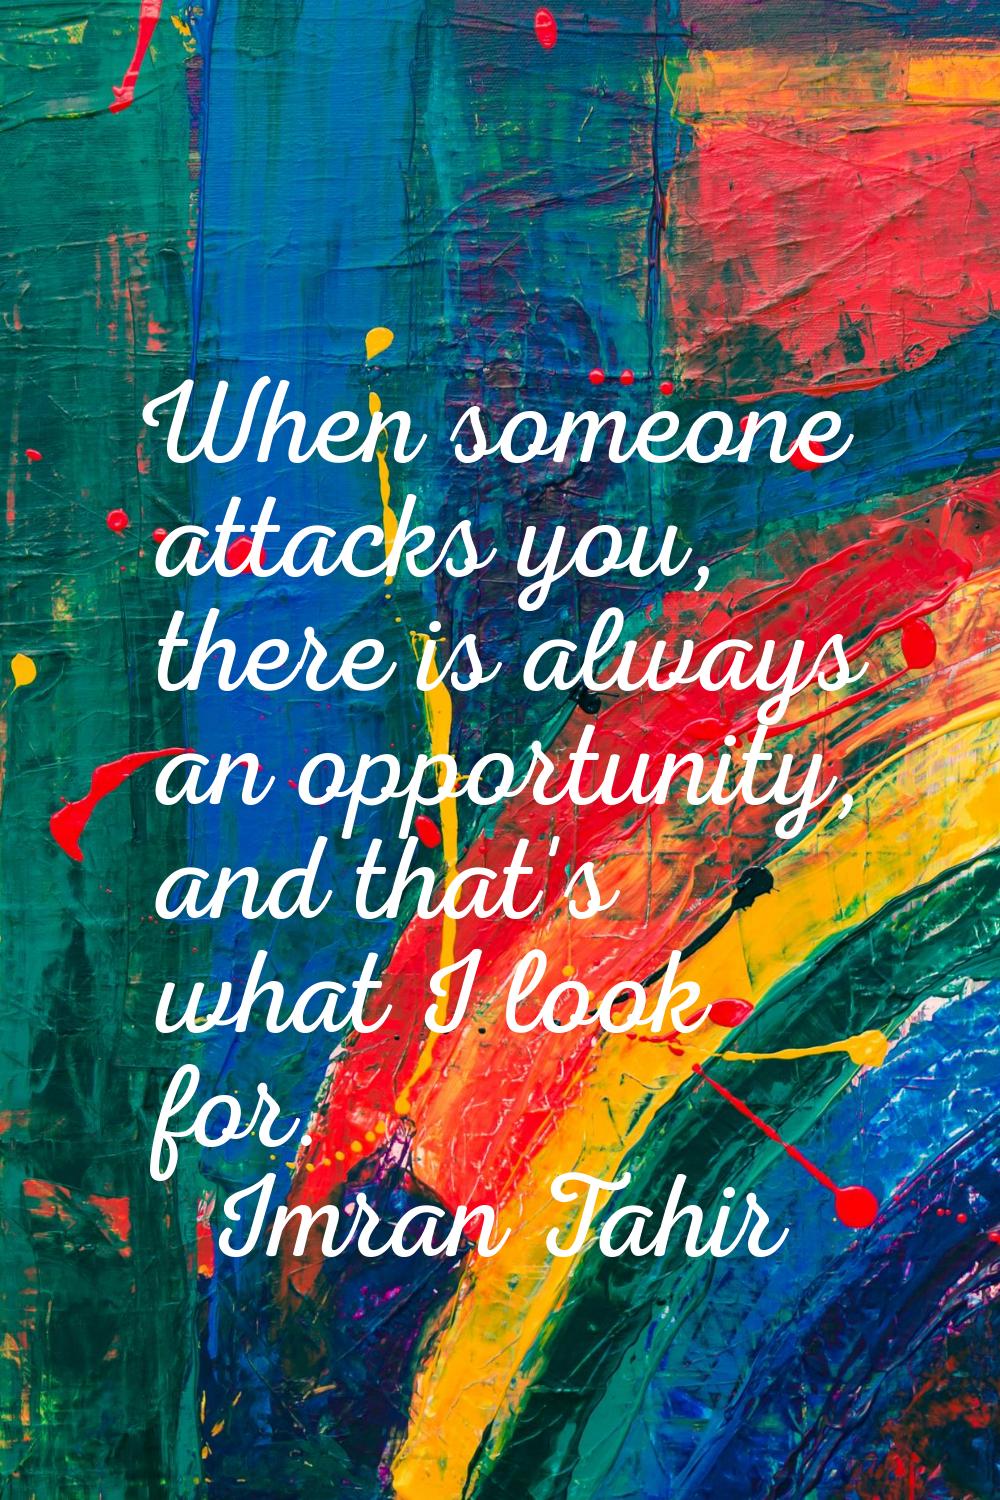 When someone attacks you, there is always an opportunity, and that's what I look for.